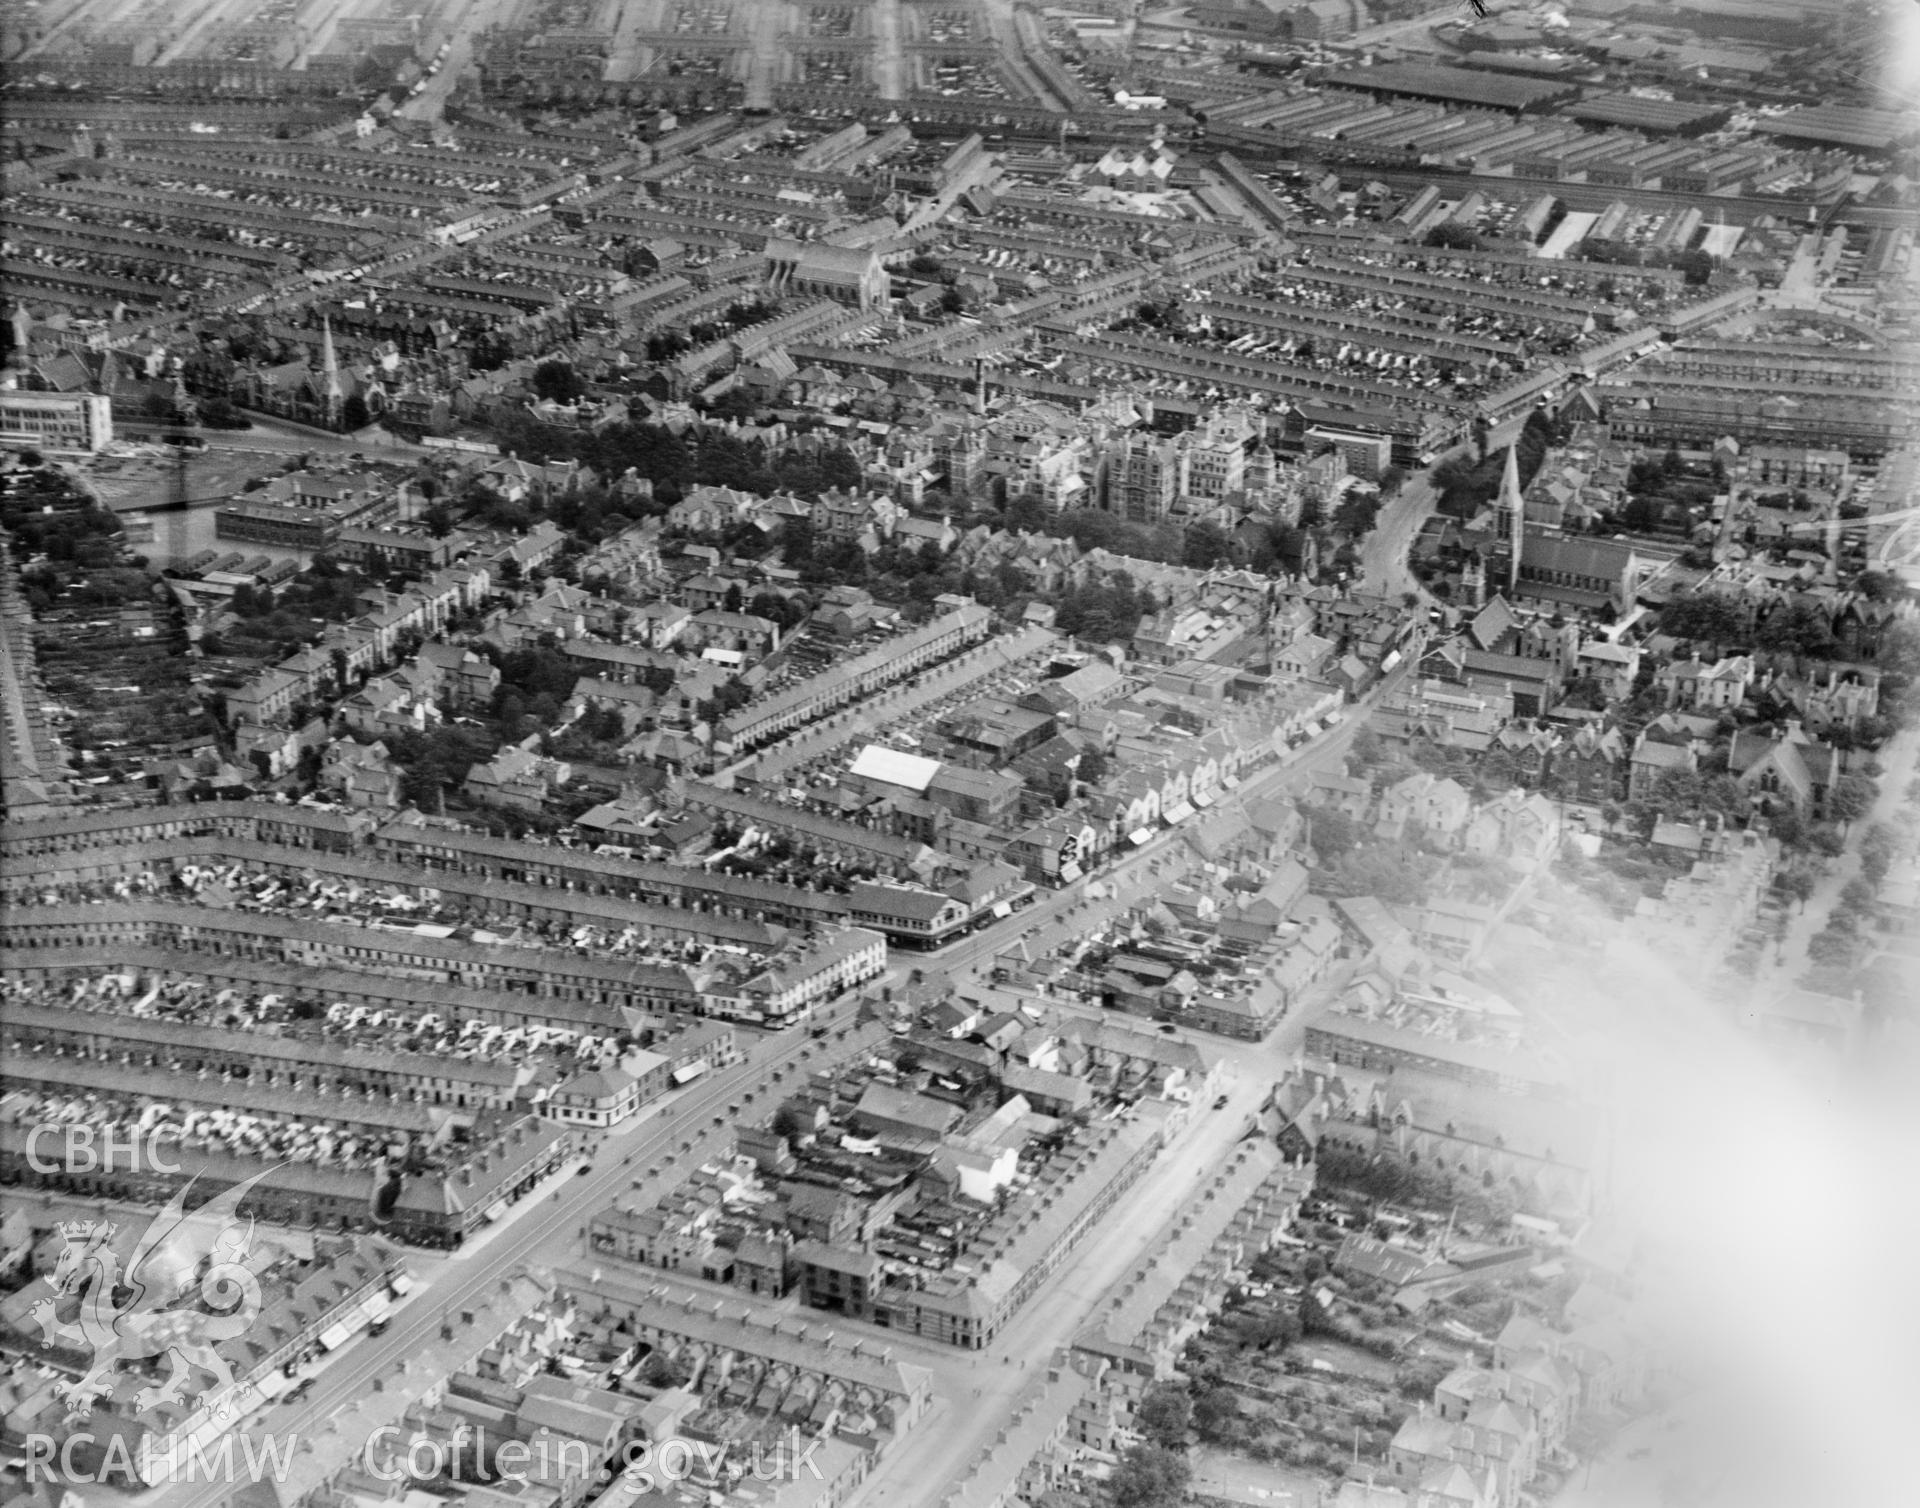 General view of Cardiff, residential areas, oblique aerial view. 5?x4? black and white glass plate negative.